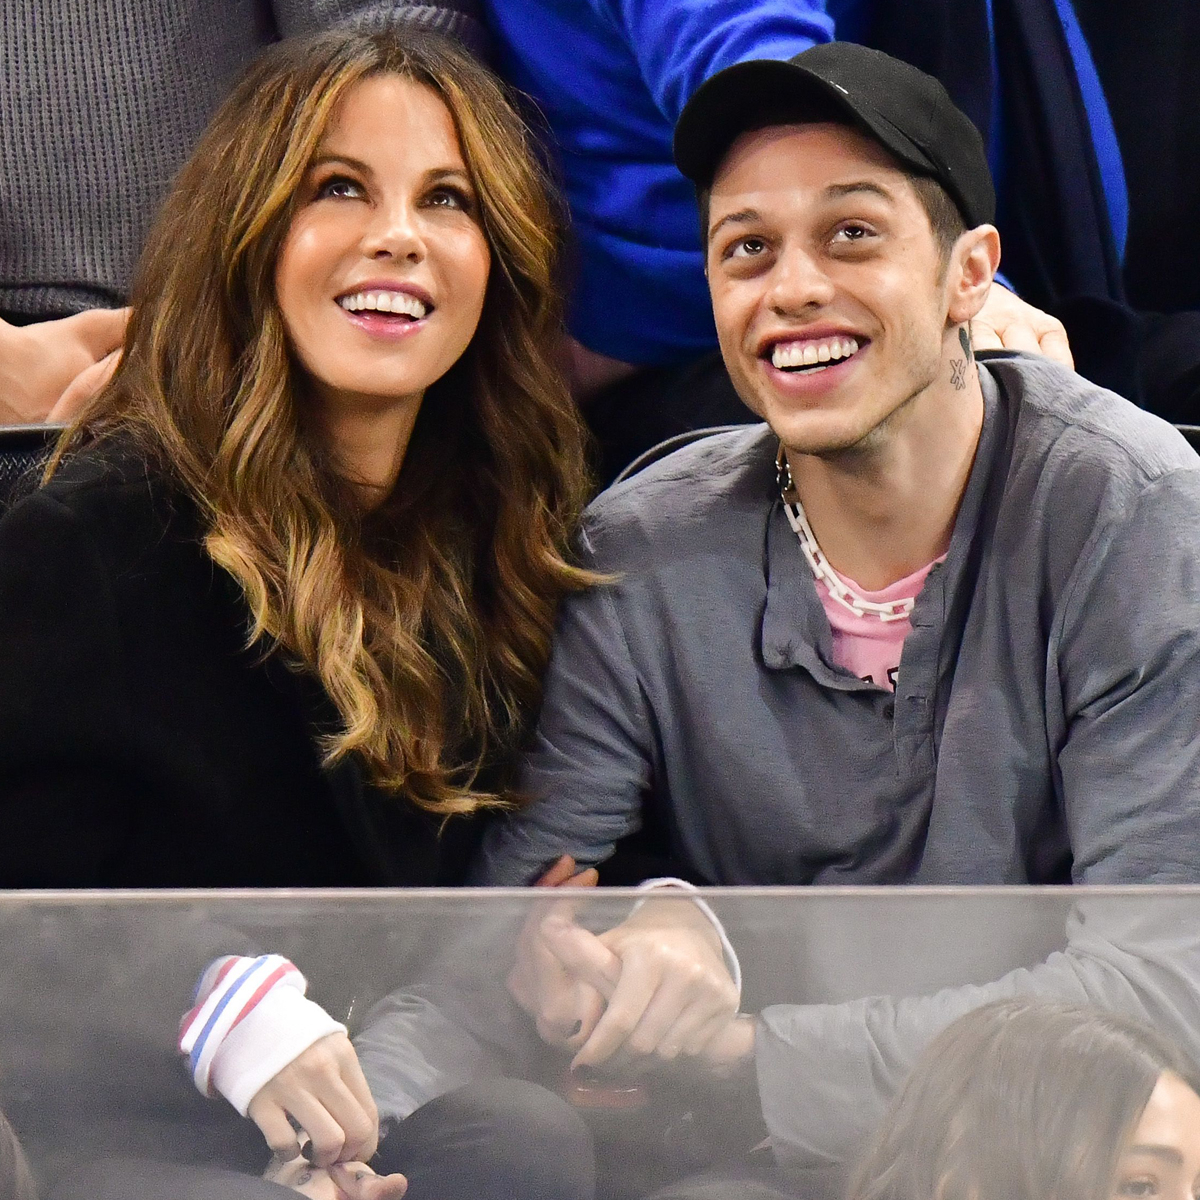 Kate Beckinsale Subtly Reacts to Theory on Ex Pete Allure - E! Online